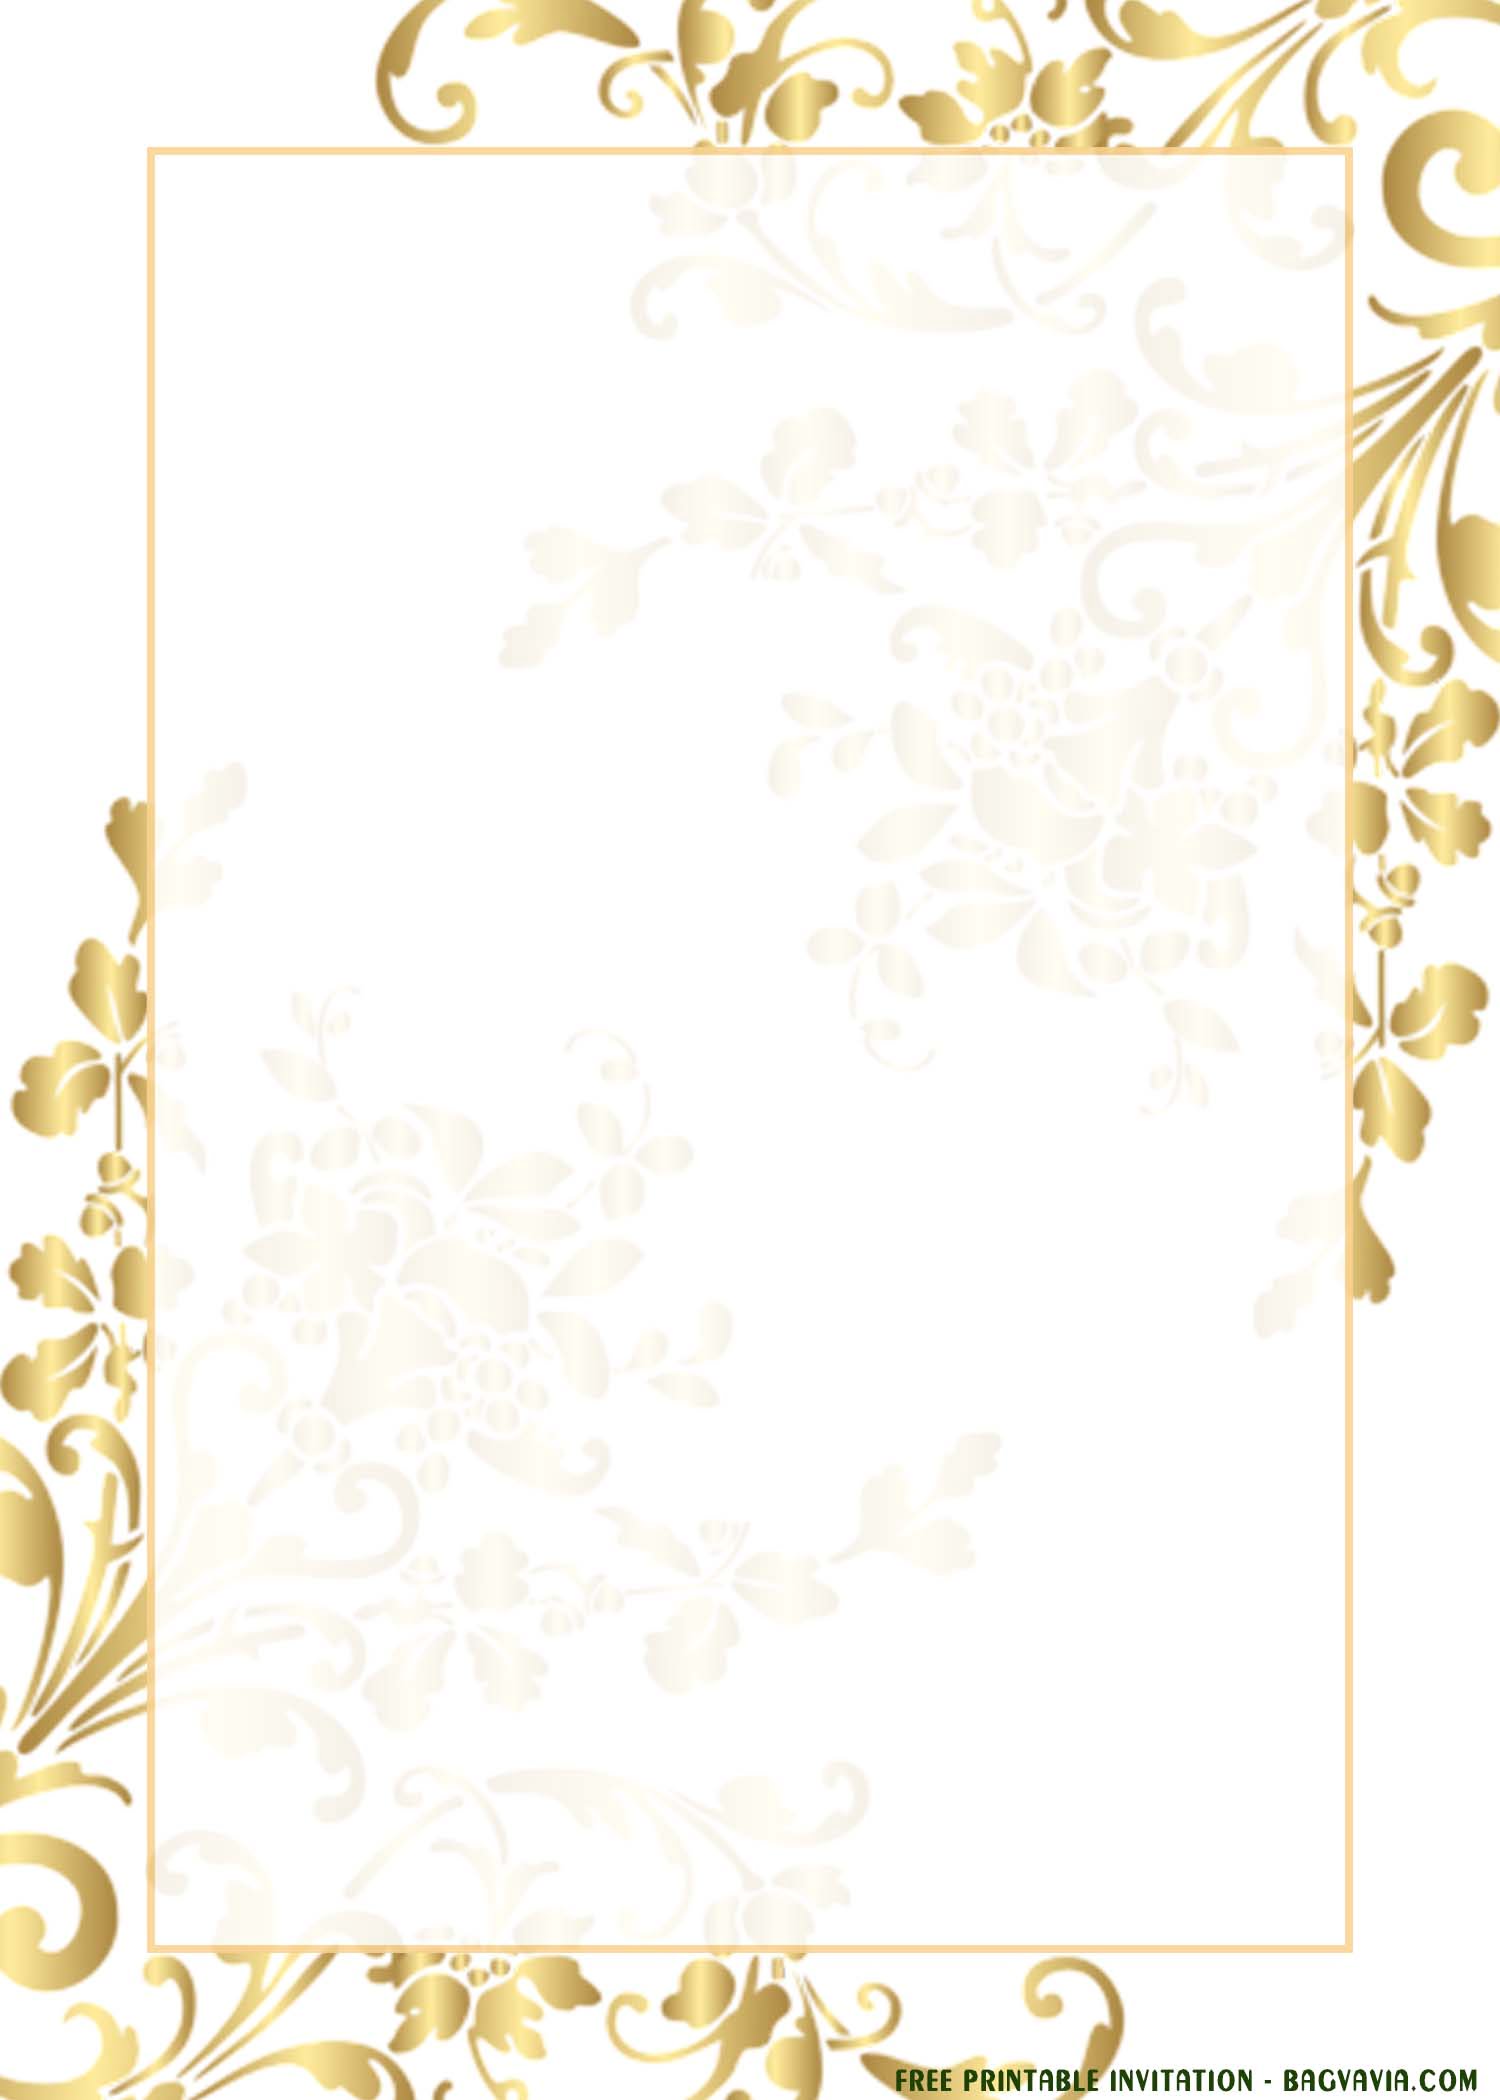 free printable) – gold lace invitation templates for any occasions